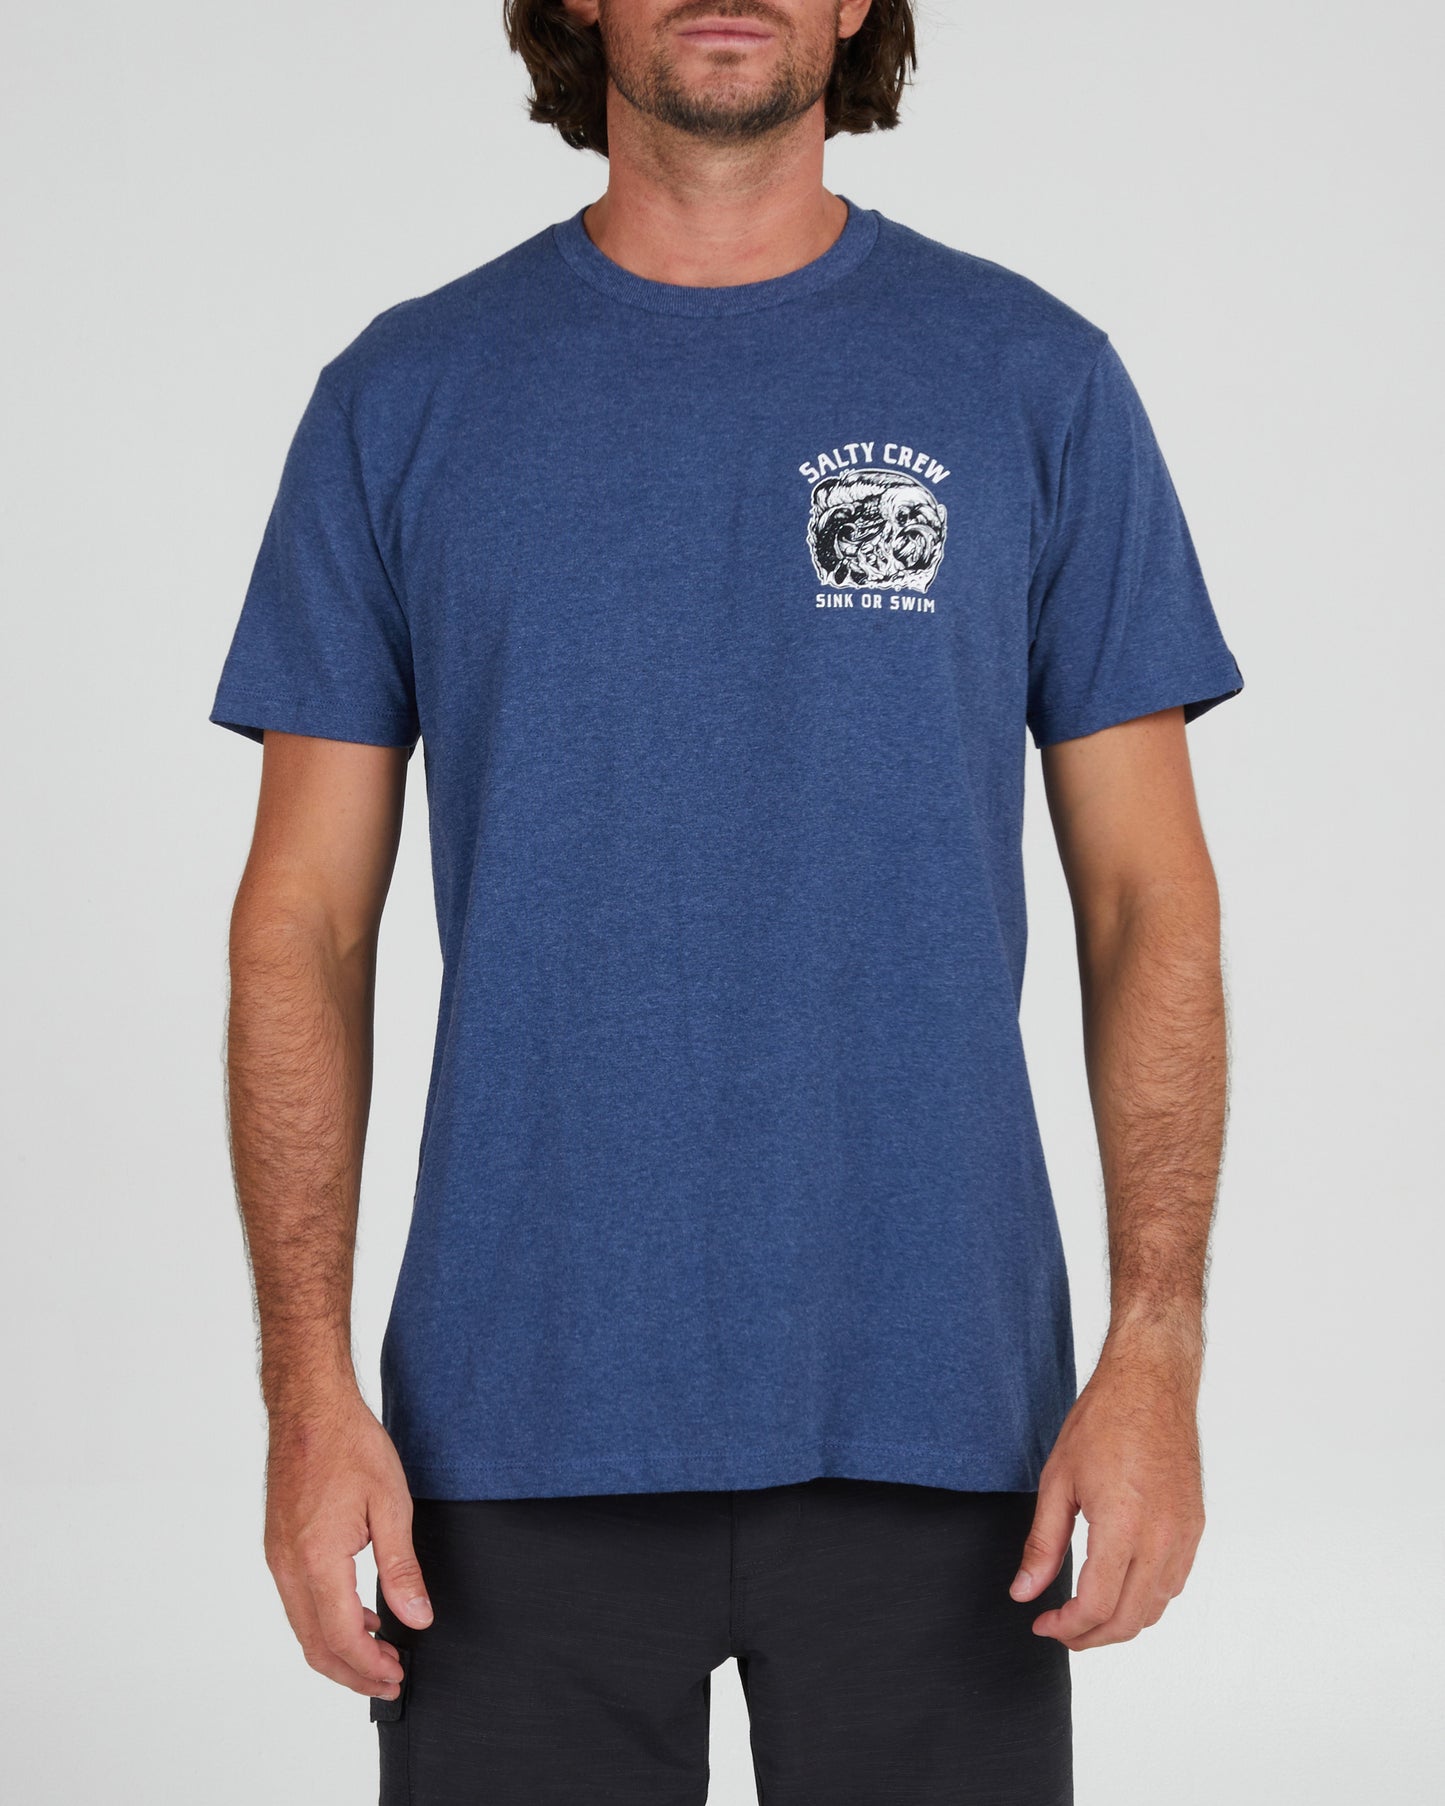 On body front of the Tsunami Navy Heather S/S Standard Tee